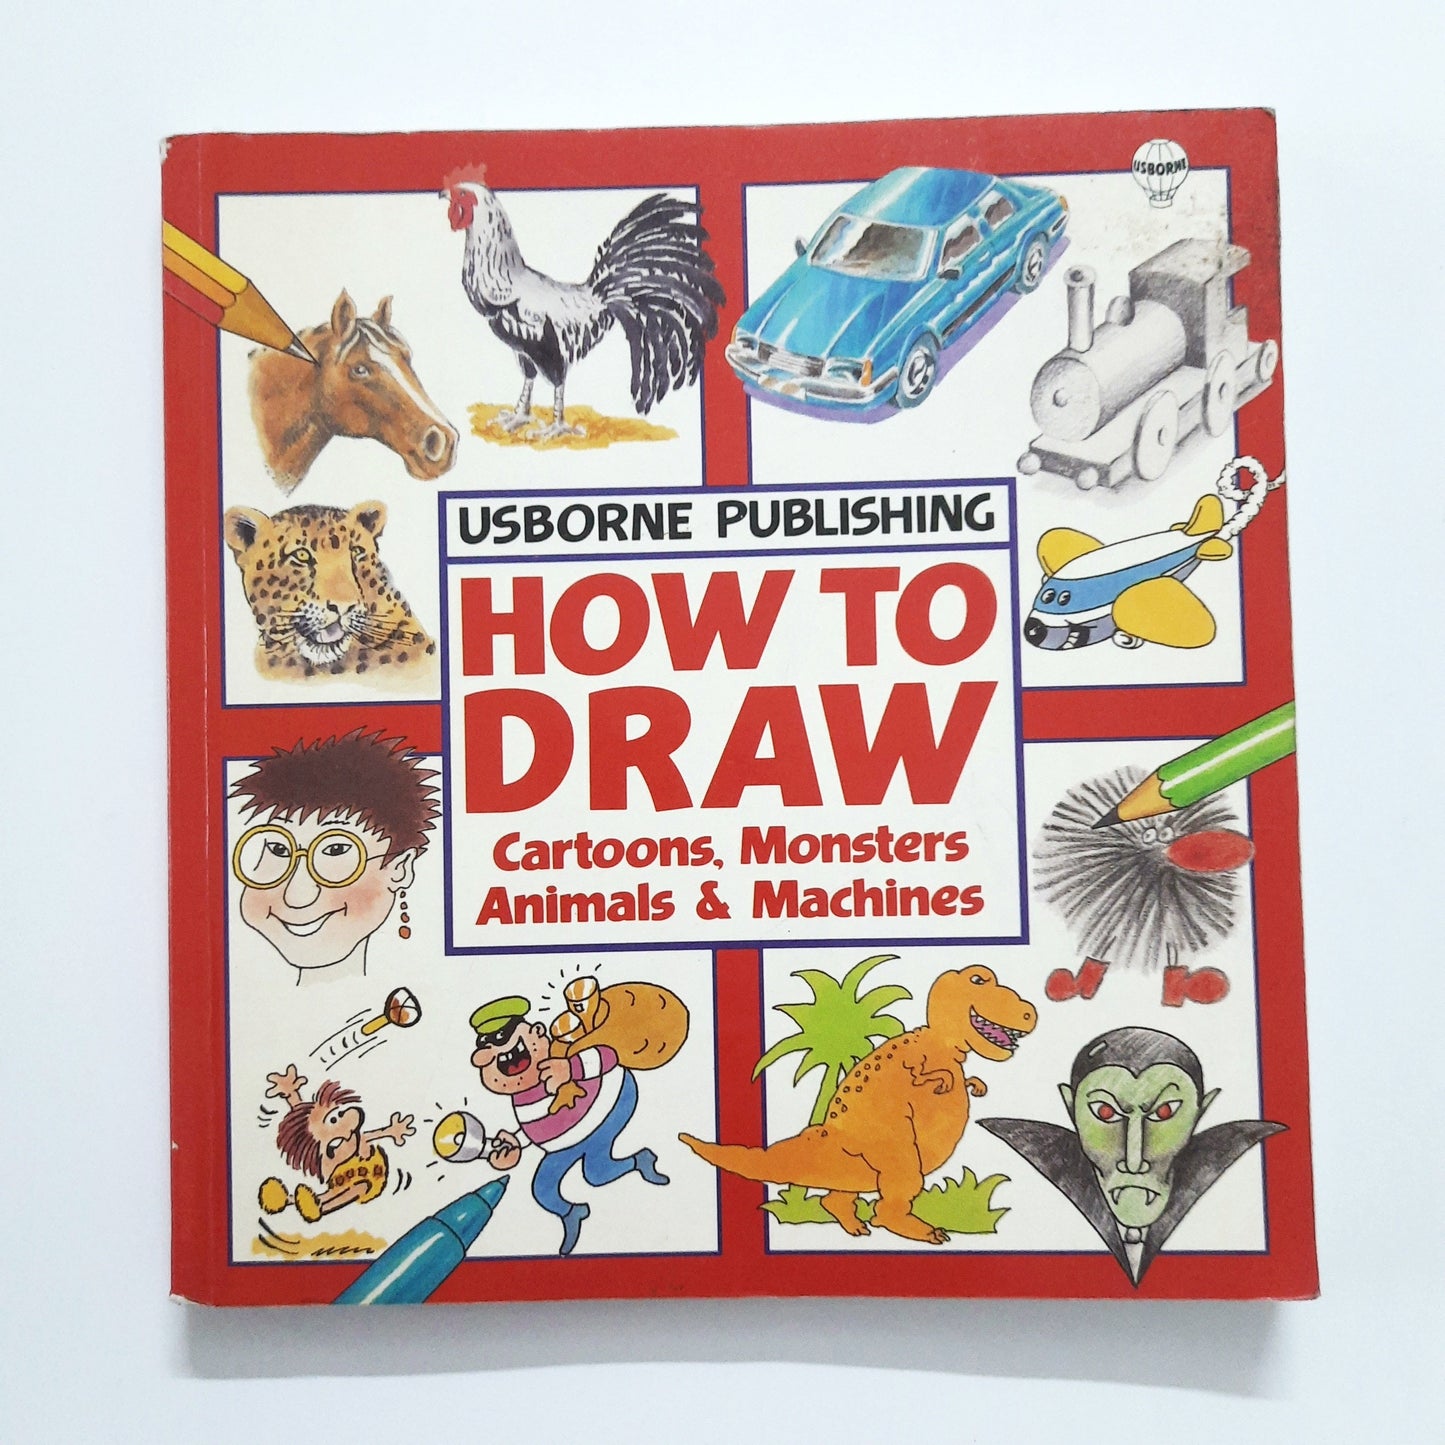 Usborne - How to draw cartoons, monsters animals and machines